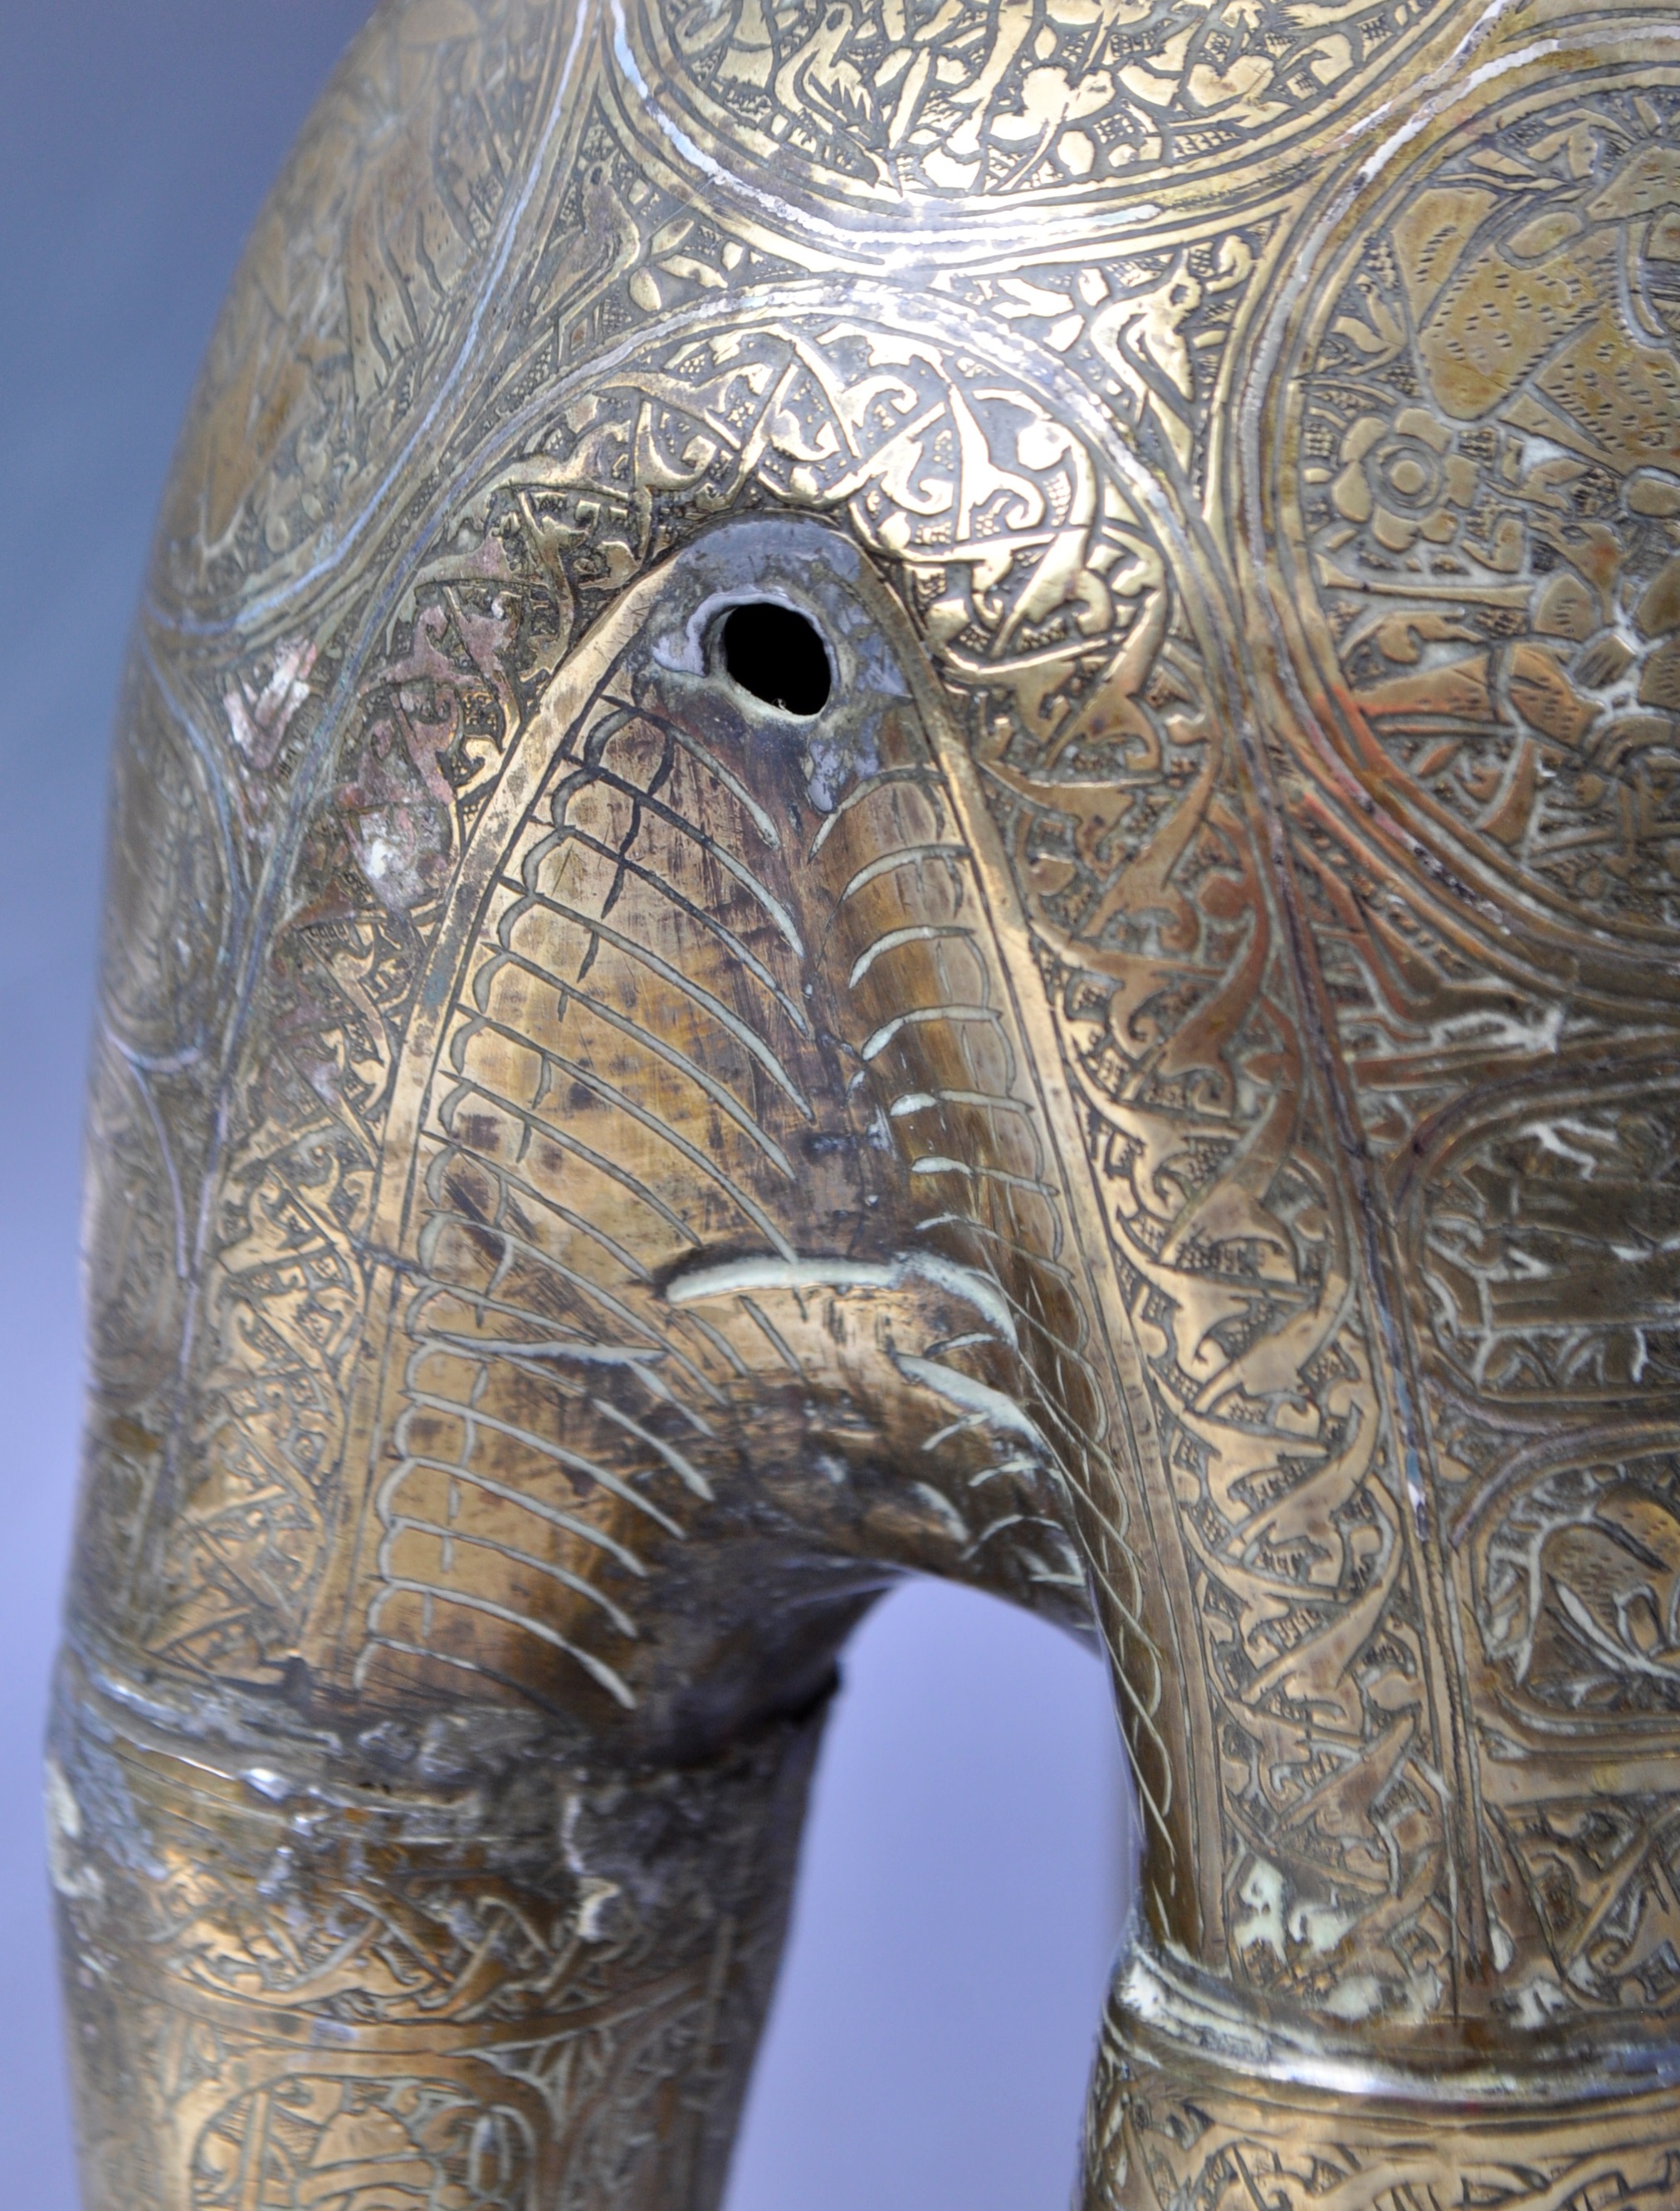 19TH CENTURY INDIAN / MIDDLE EASTERN FINELY ENGRAVED BRASS ELEPHANTS - Image 6 of 8